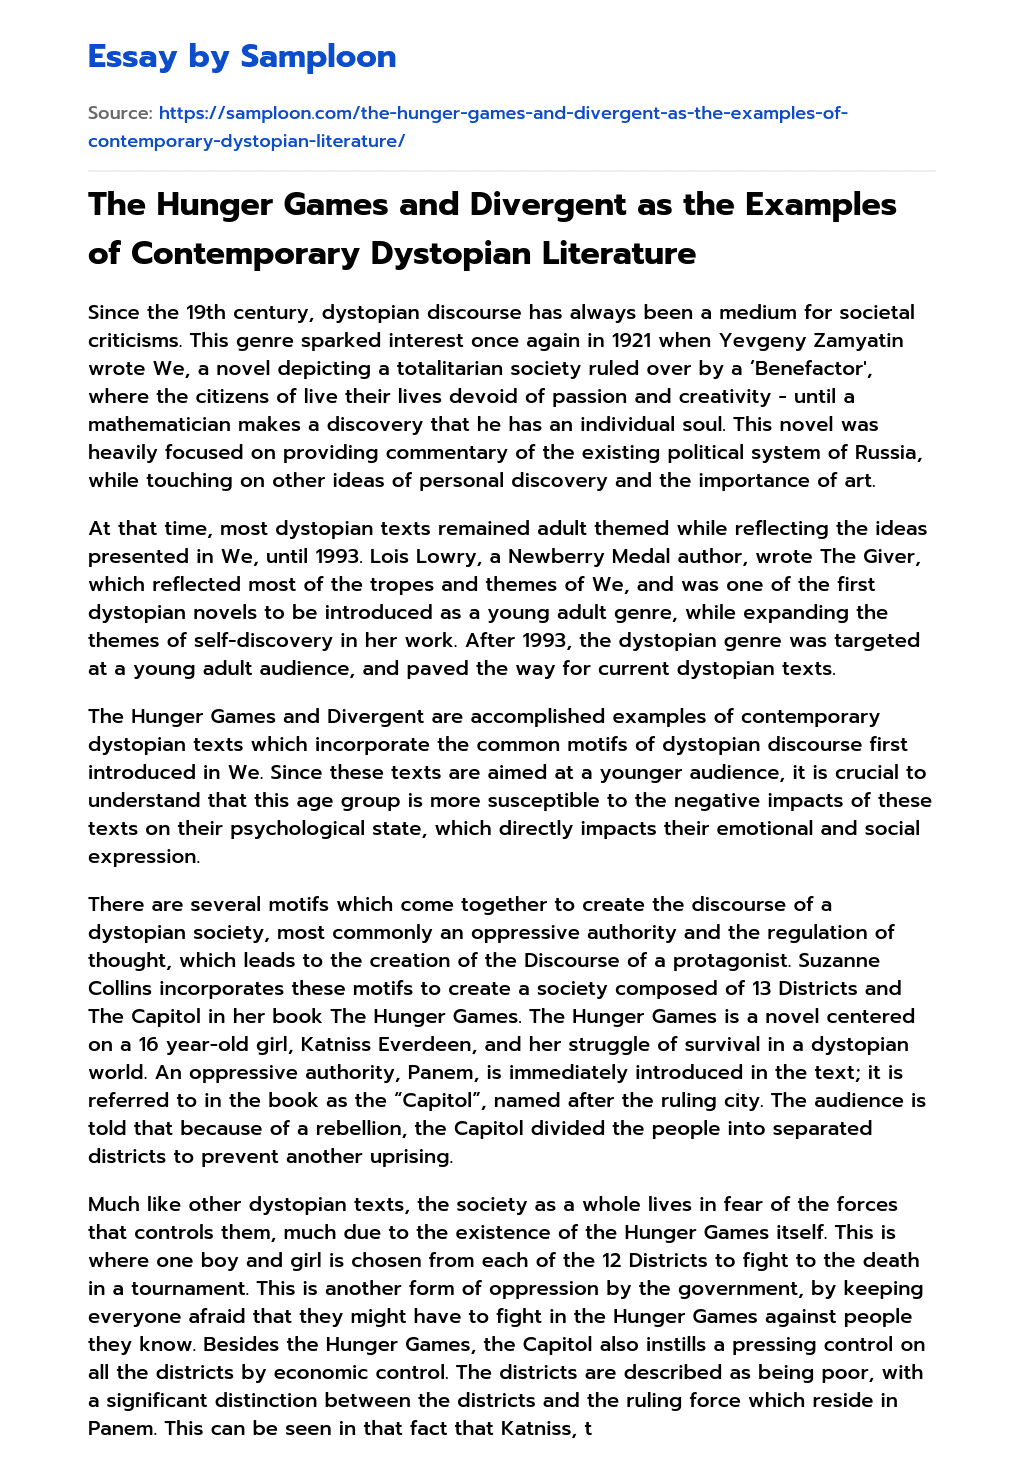 The Hunger Games and Divergent as the Examples of Contemporary Dystopian Literature essay